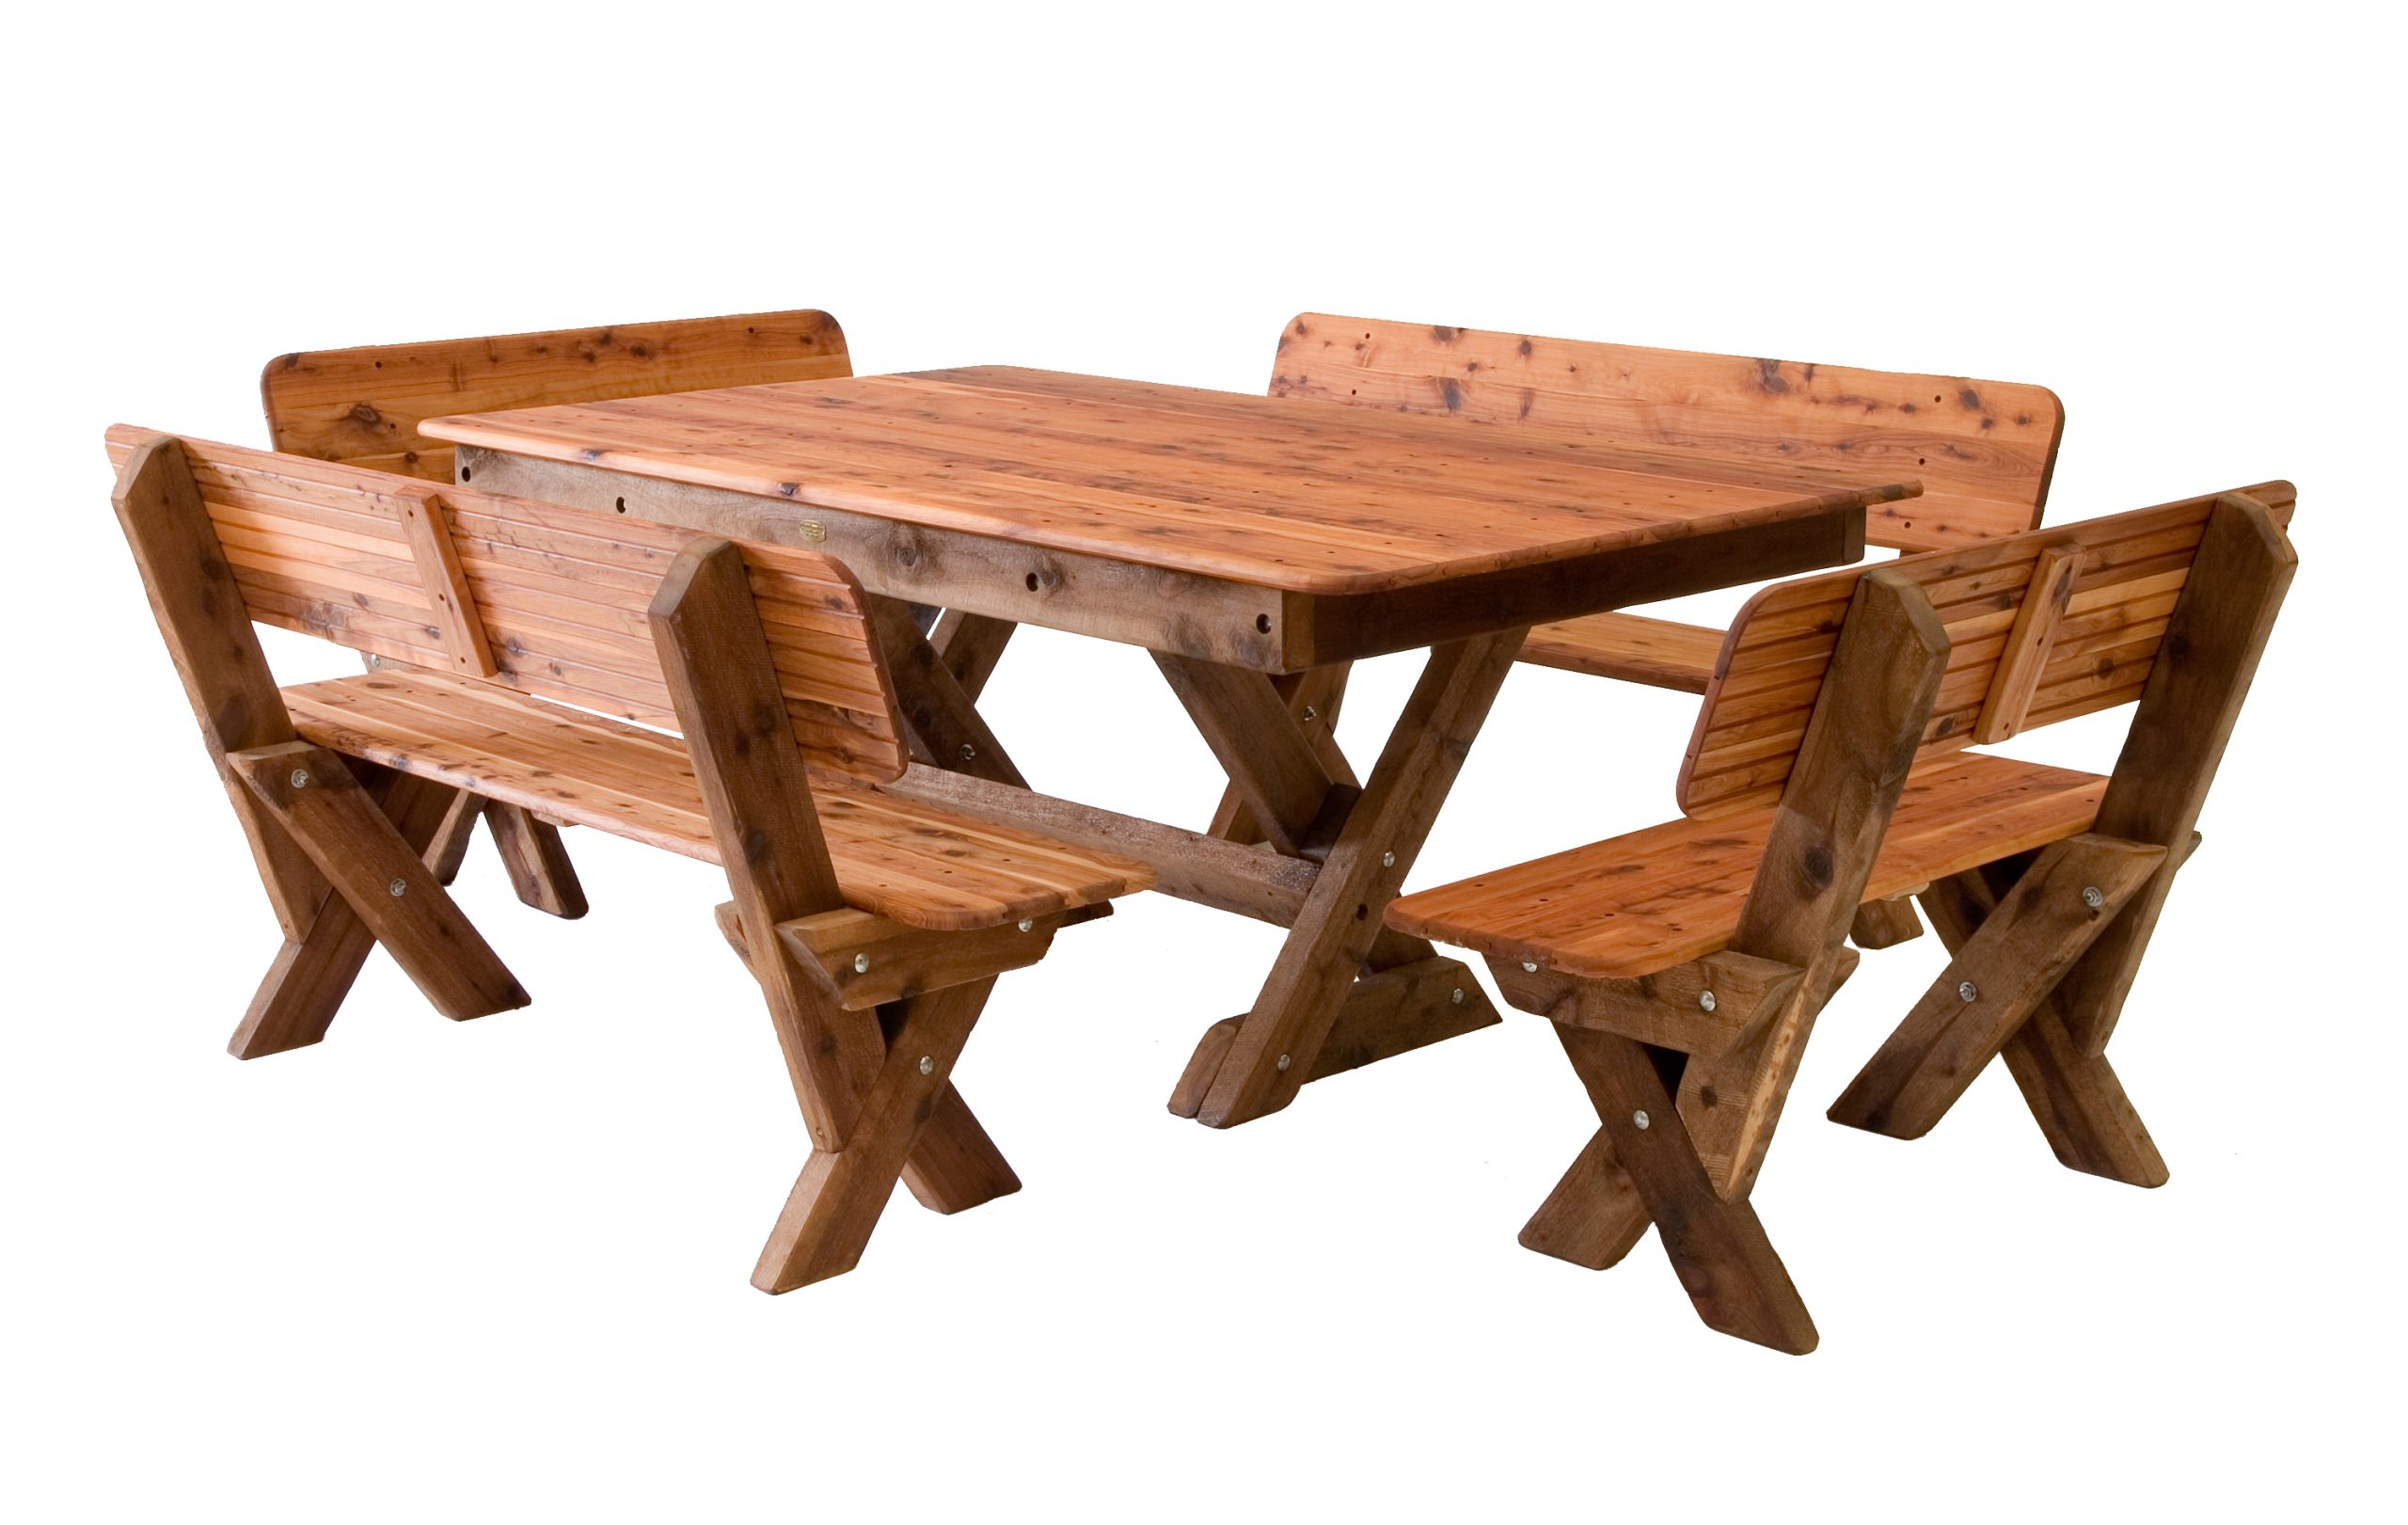 Currumbin High Back Cypress Outdoor Timber Setting available to order now